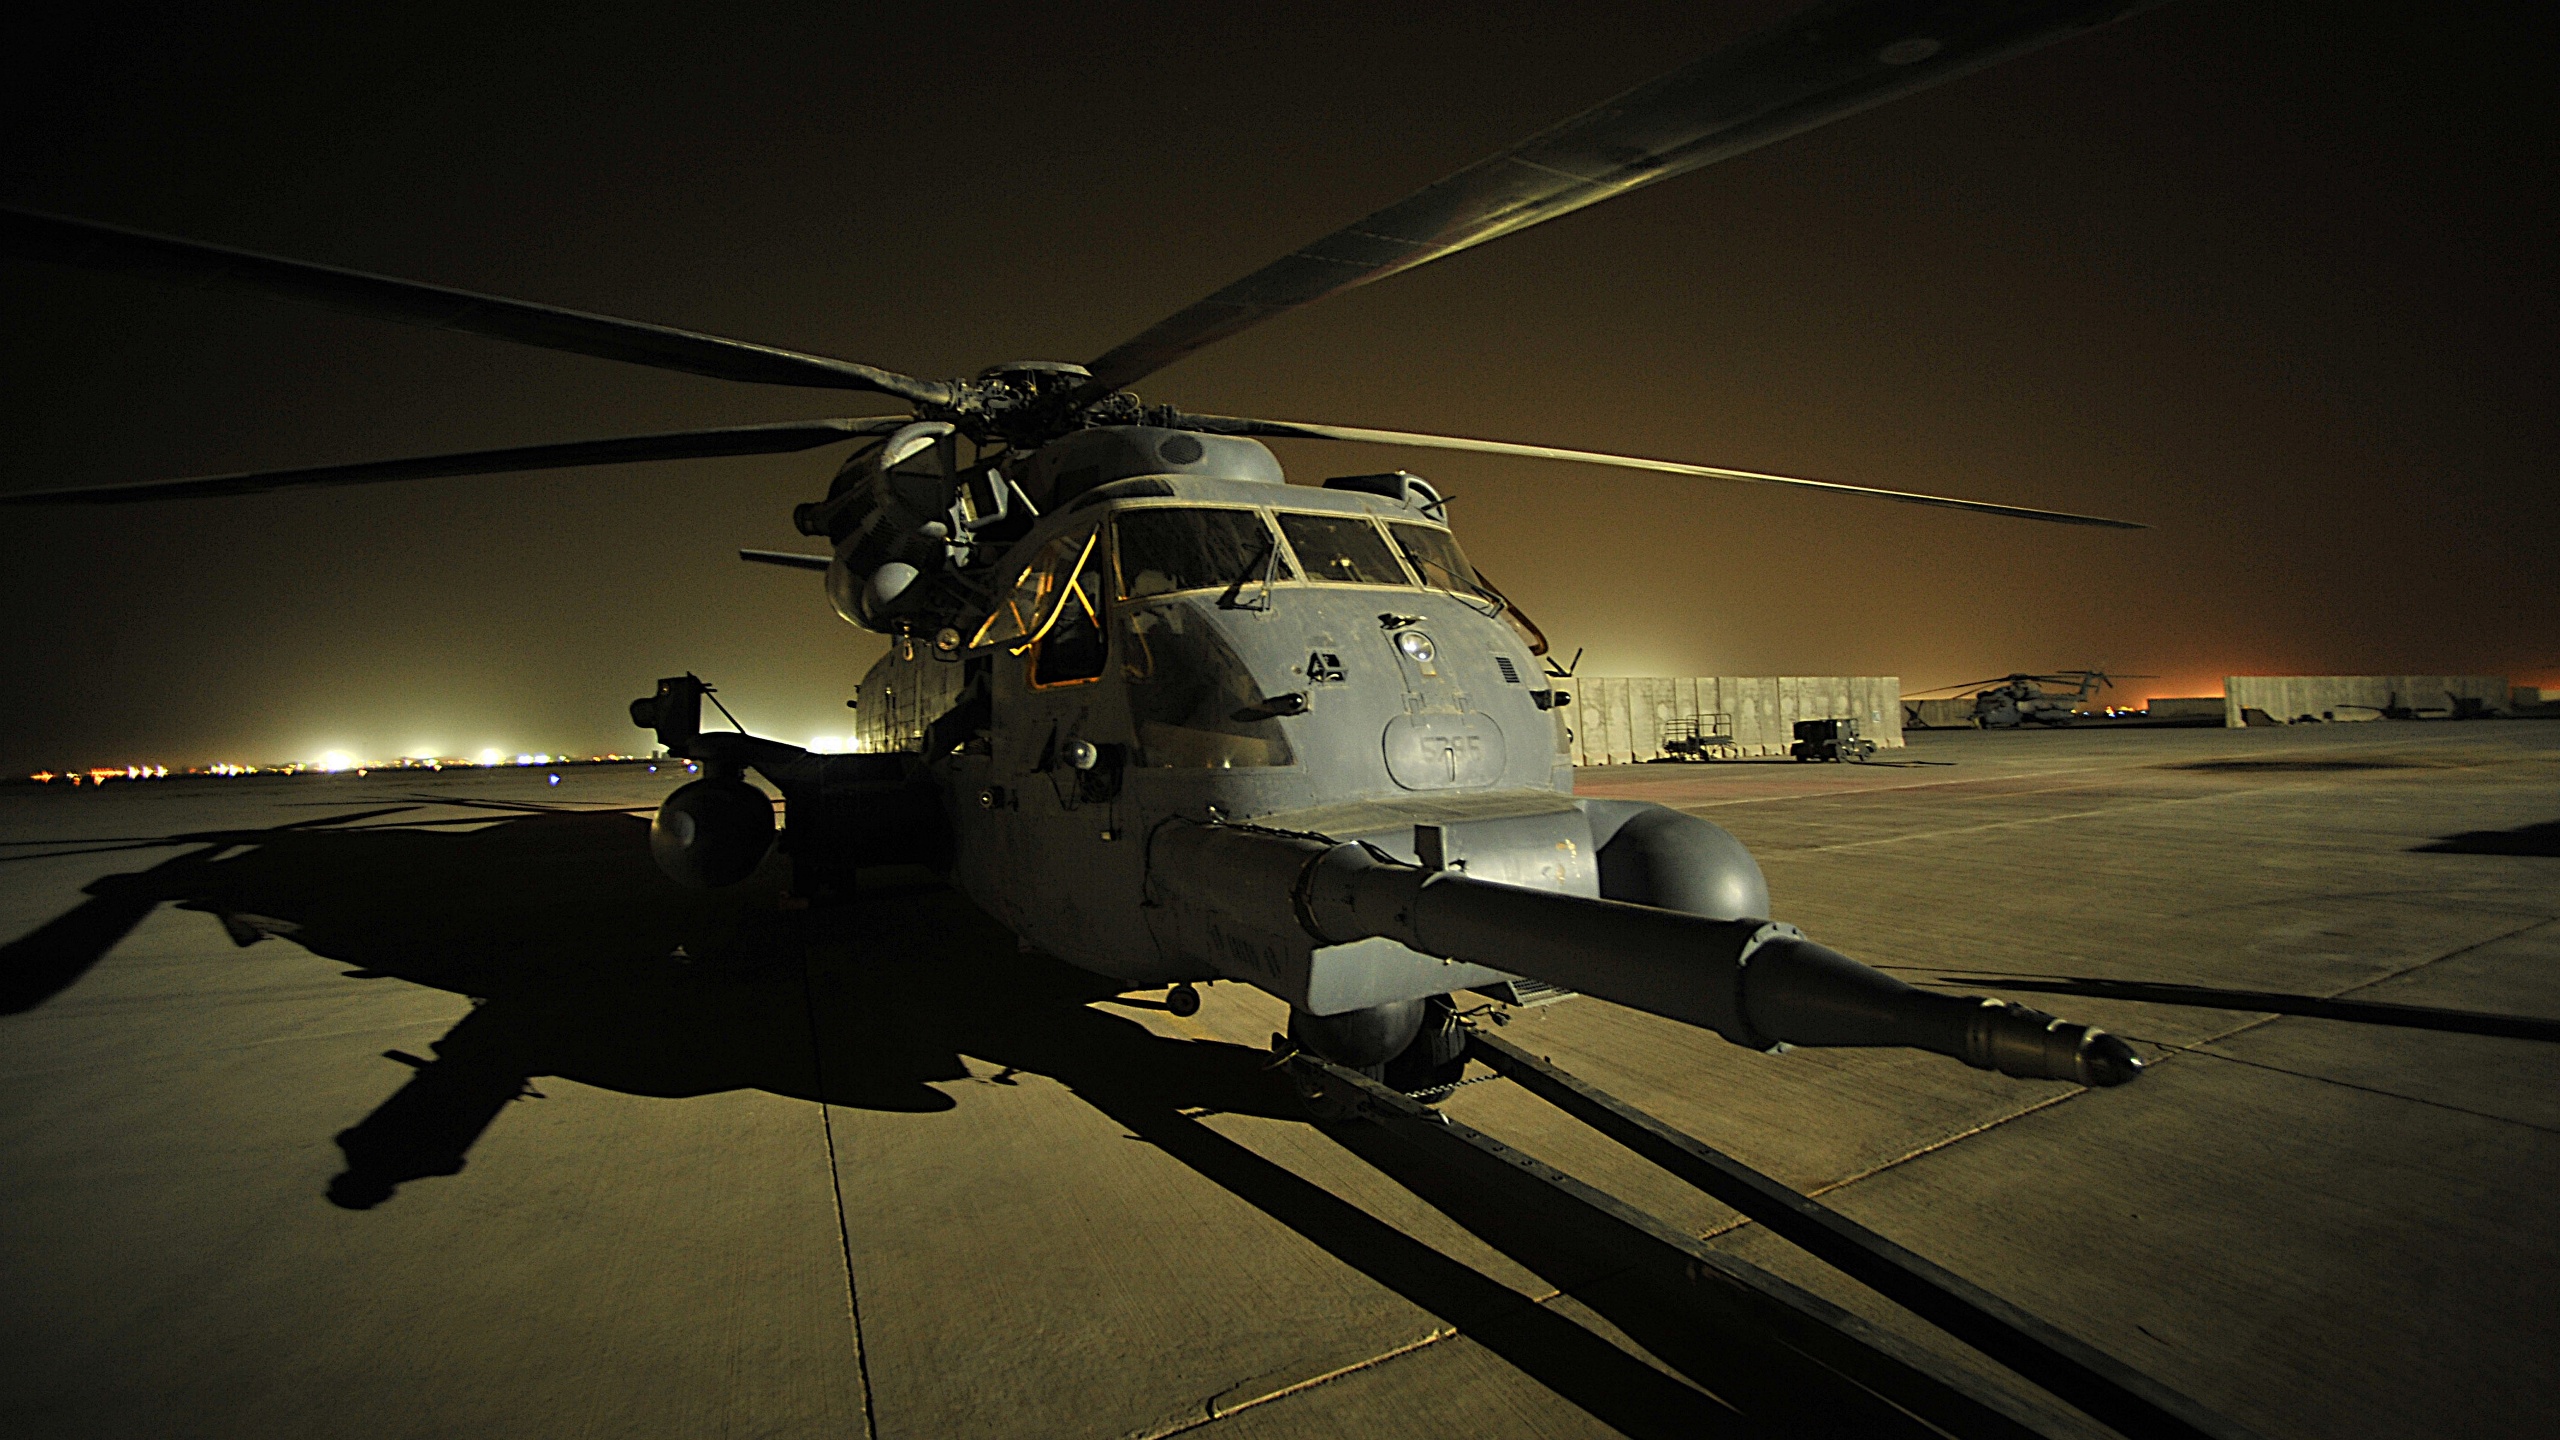 Helicopter - Sikorsky MH-53 Pave Low